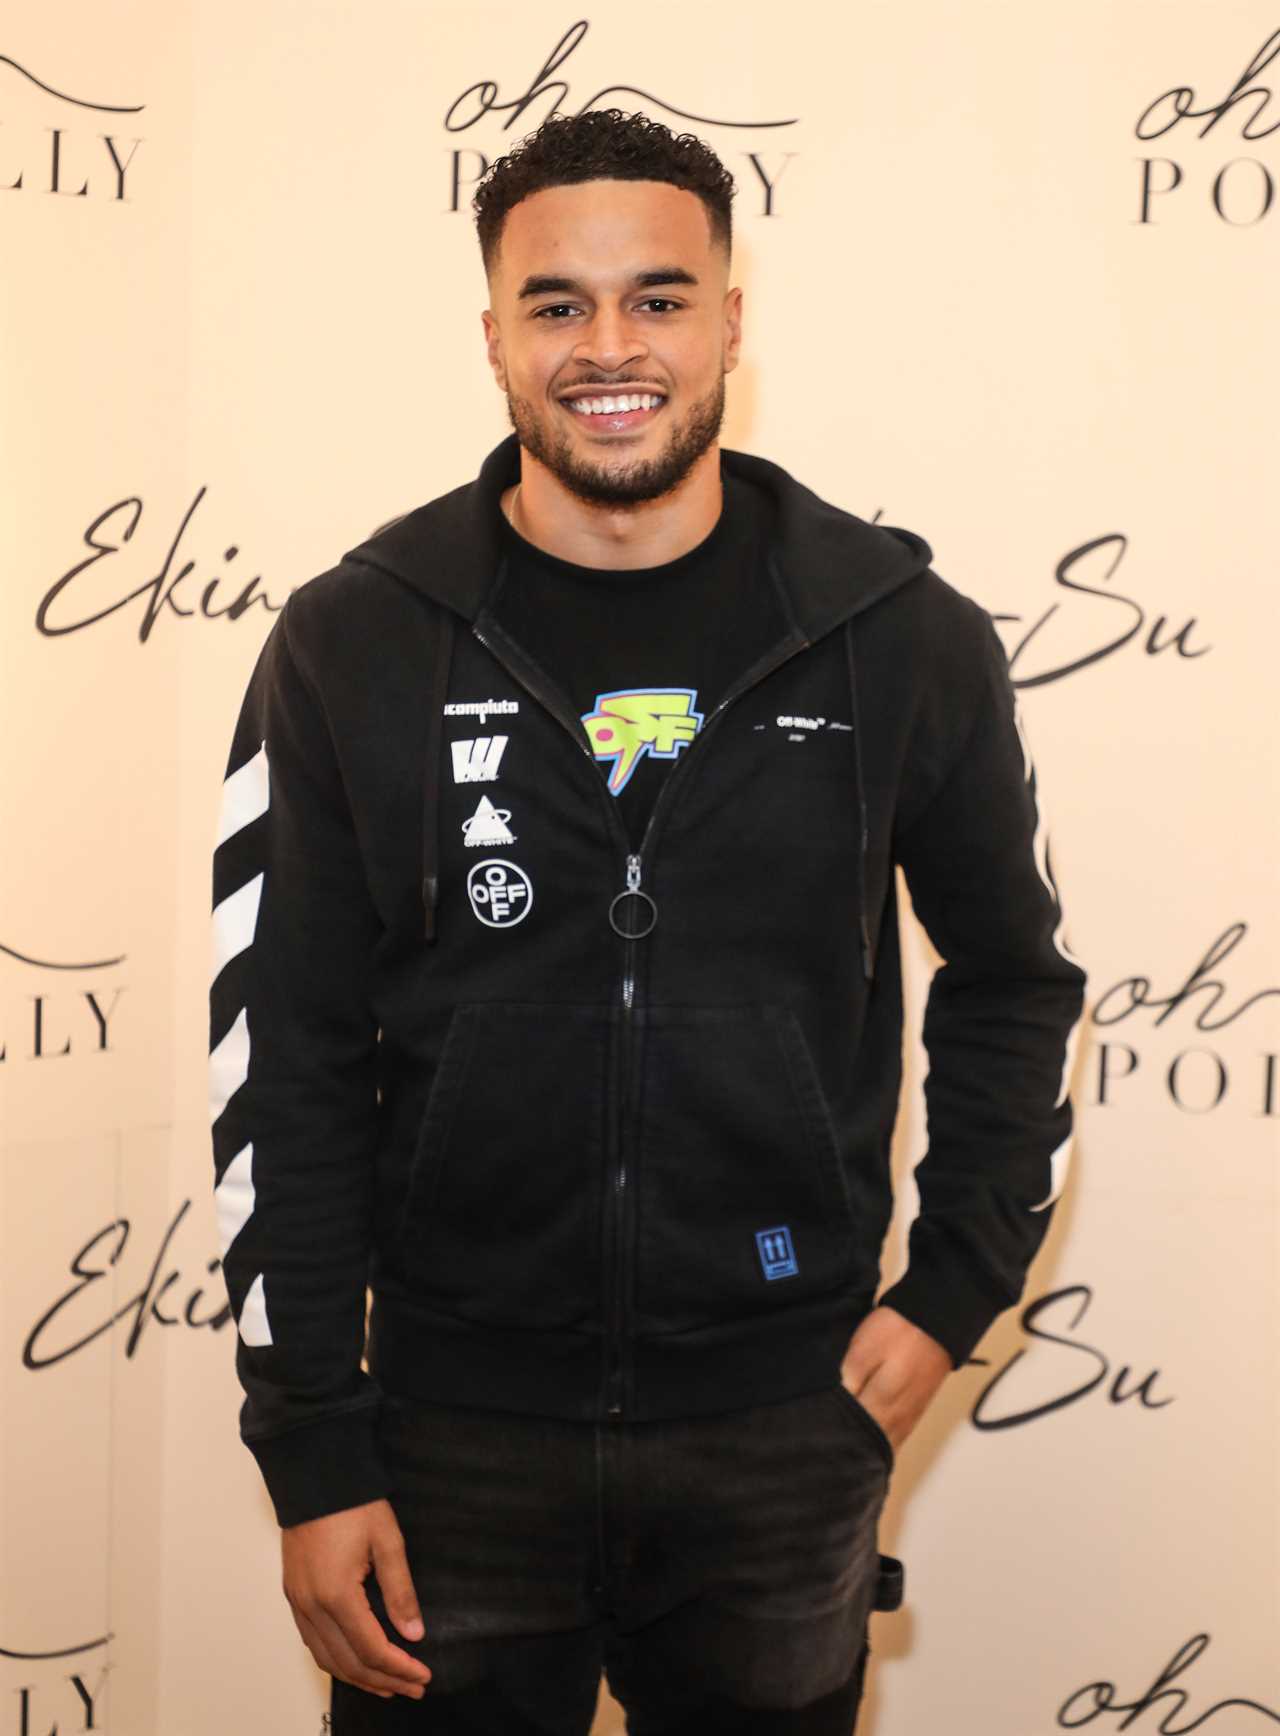 Love Island’s Tyrique Hyde has a surprise connection to well-known former show star